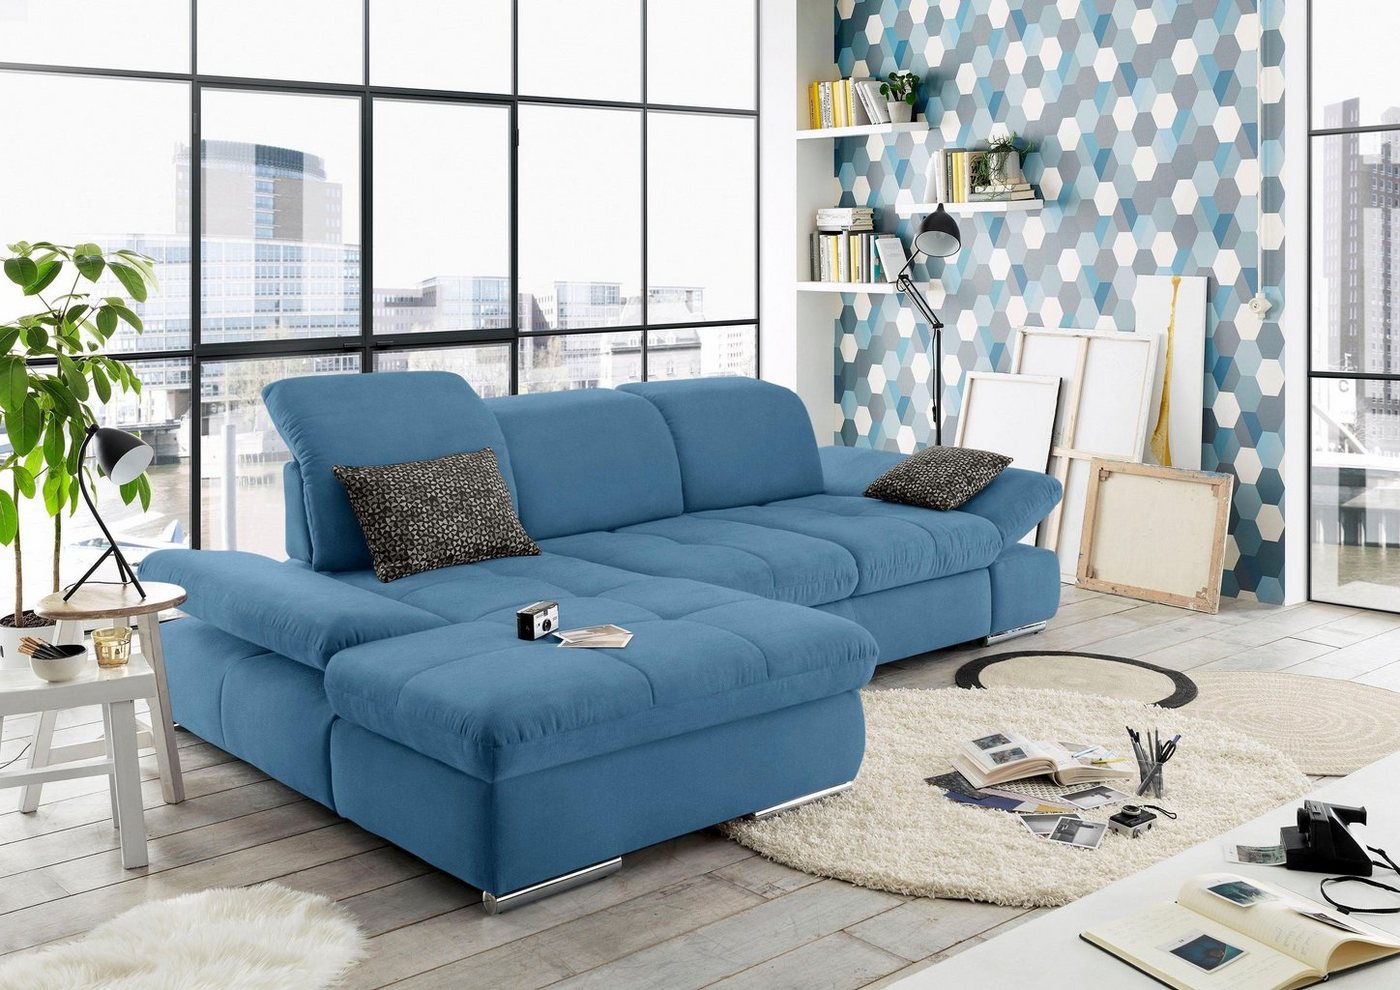 set one by Musterring Ecksofa SO 4100, Recamiere links oder rechts, wahlweise mit Bettfunktion von set one by Musterring